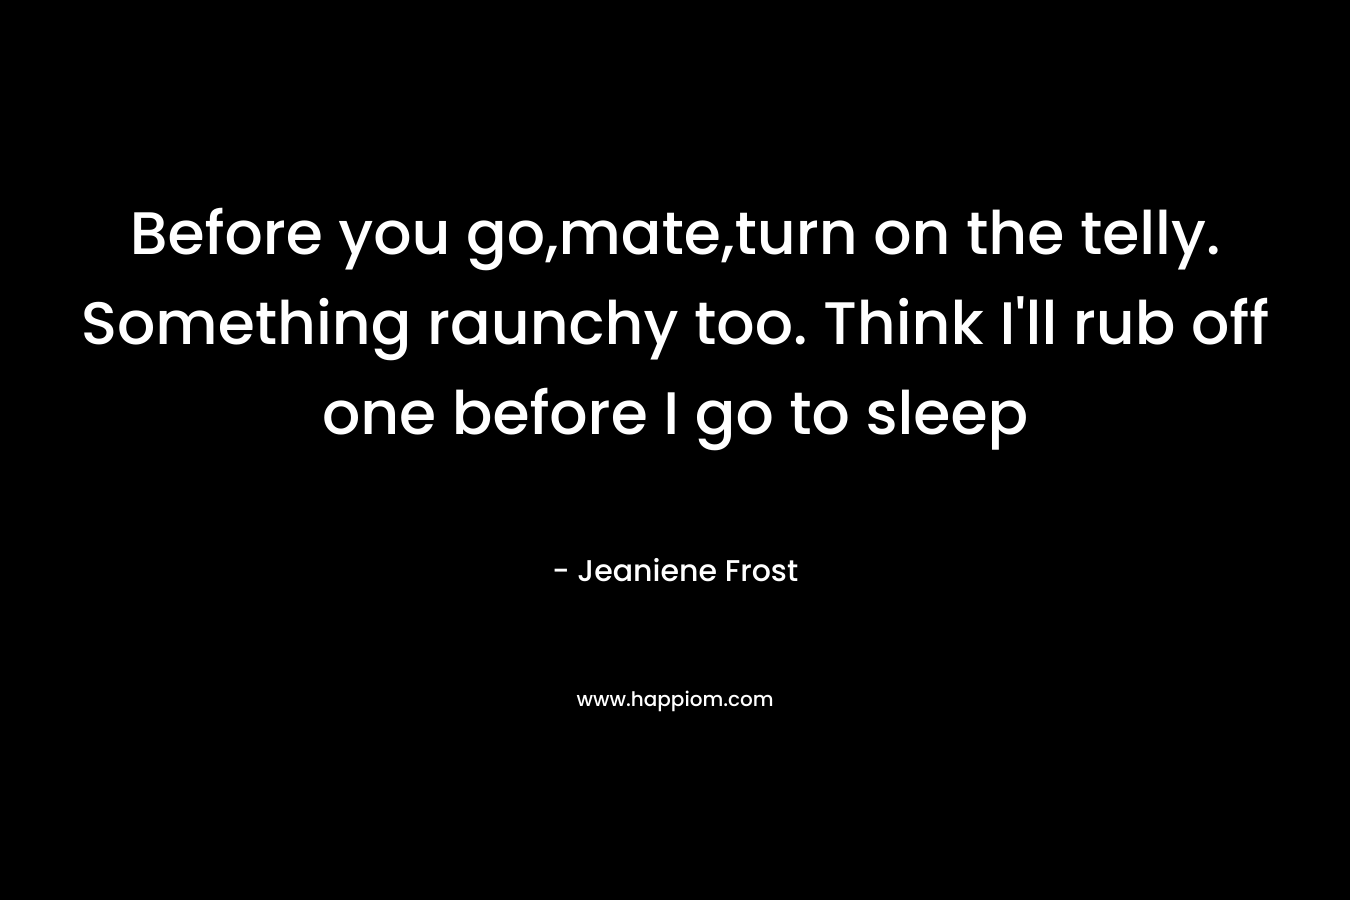 Before you go,mate,turn on the telly. Something raunchy too. Think I’ll rub off one before I go to sleep – Jeaniene Frost